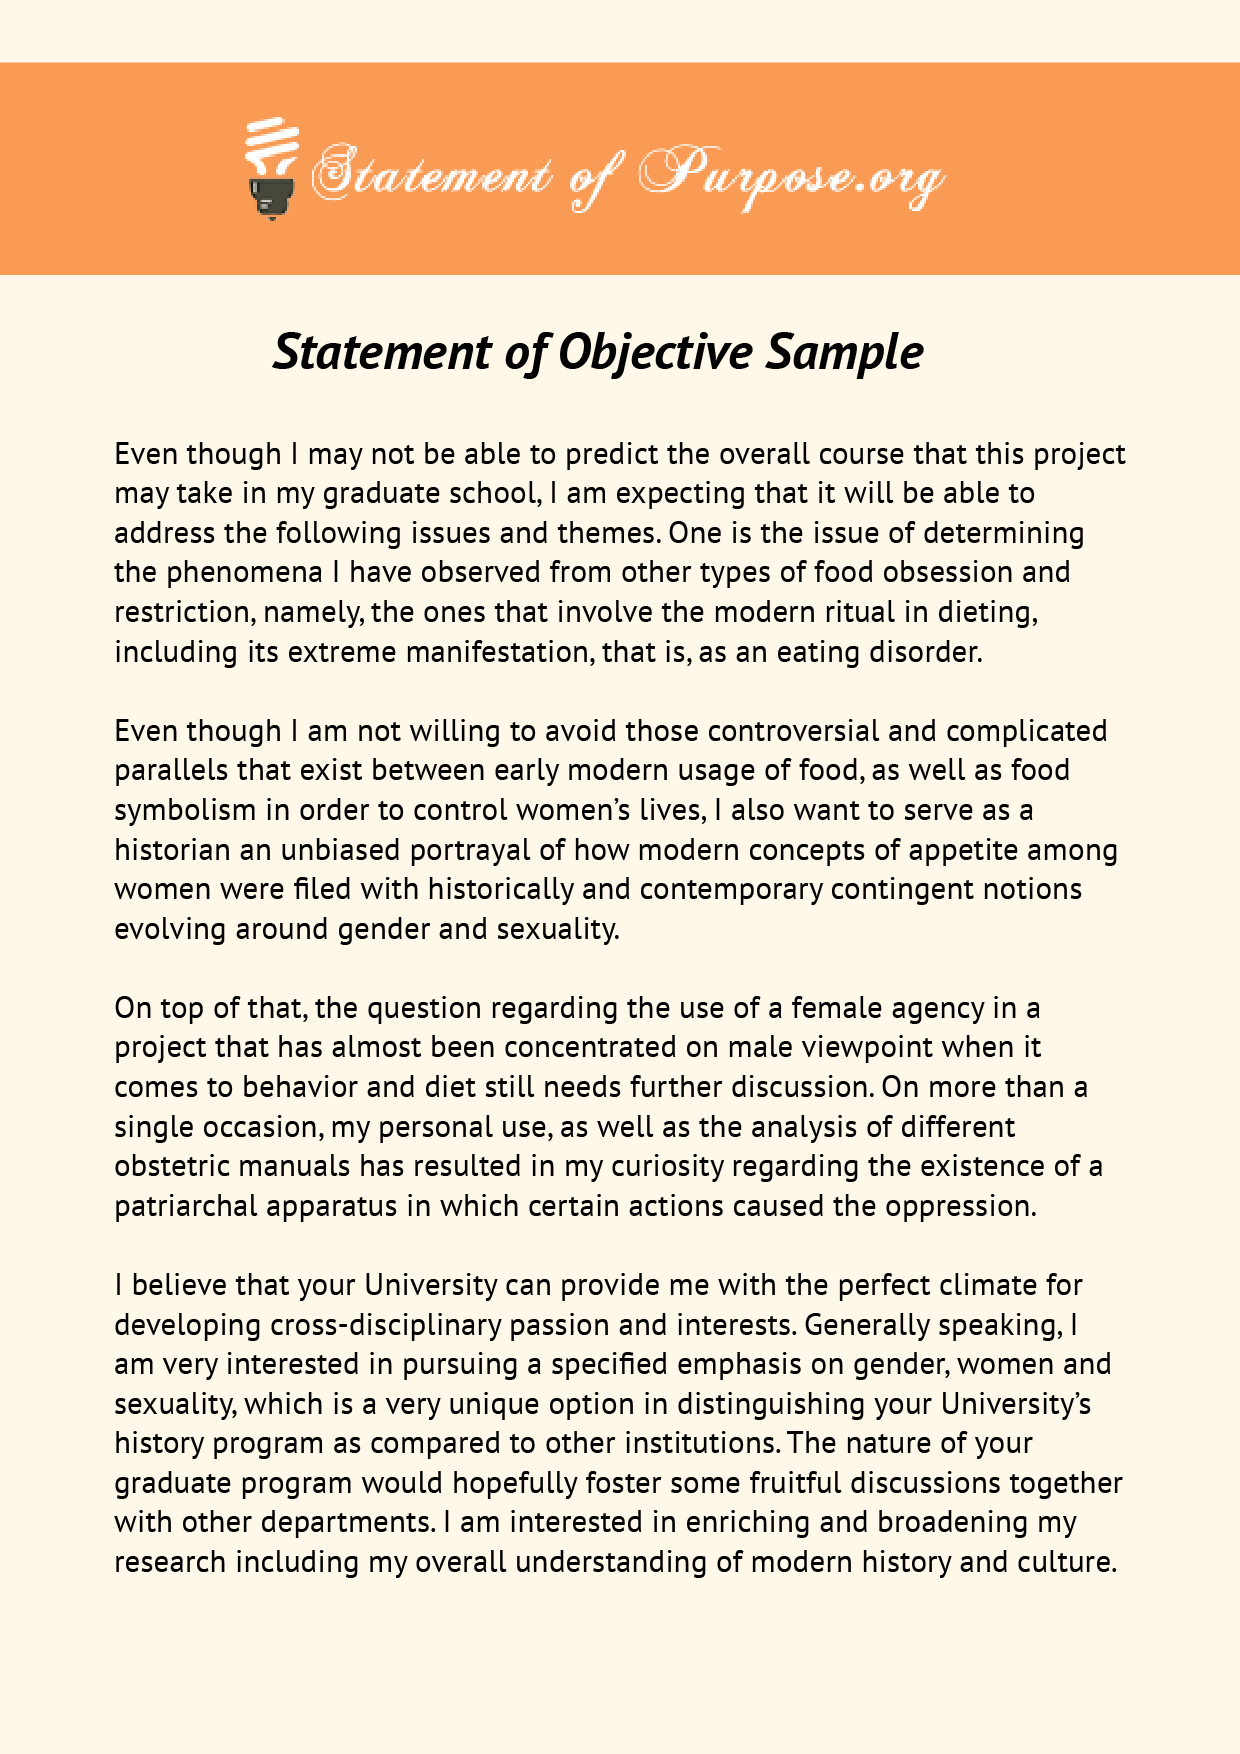 how to write objectives of research project